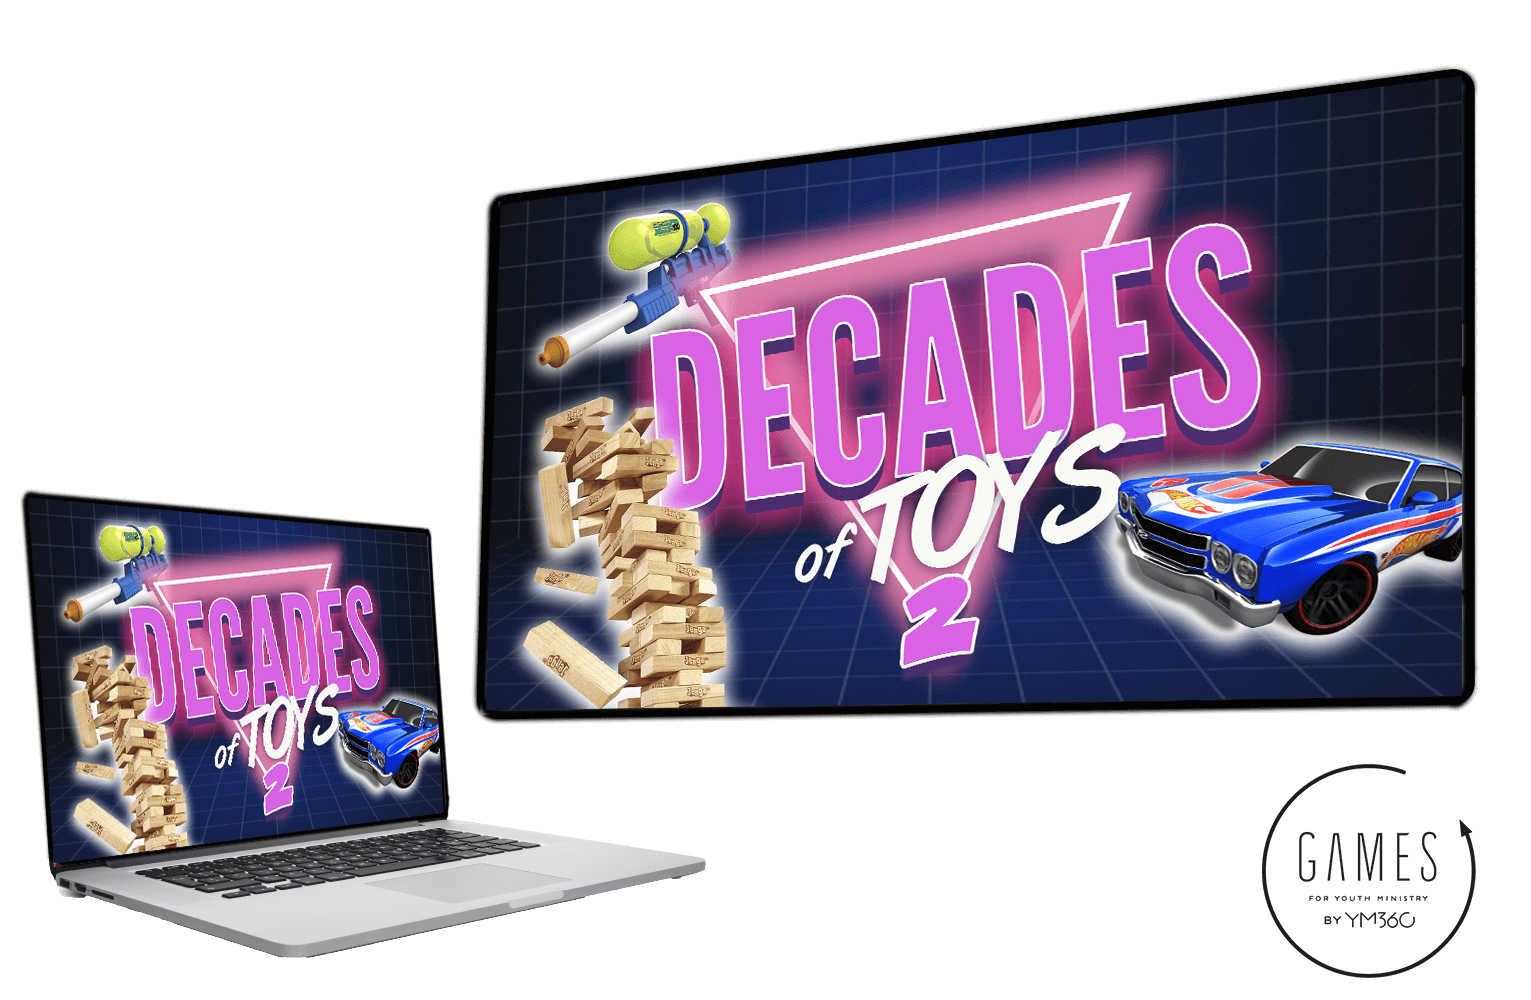 Decades of Toys 2